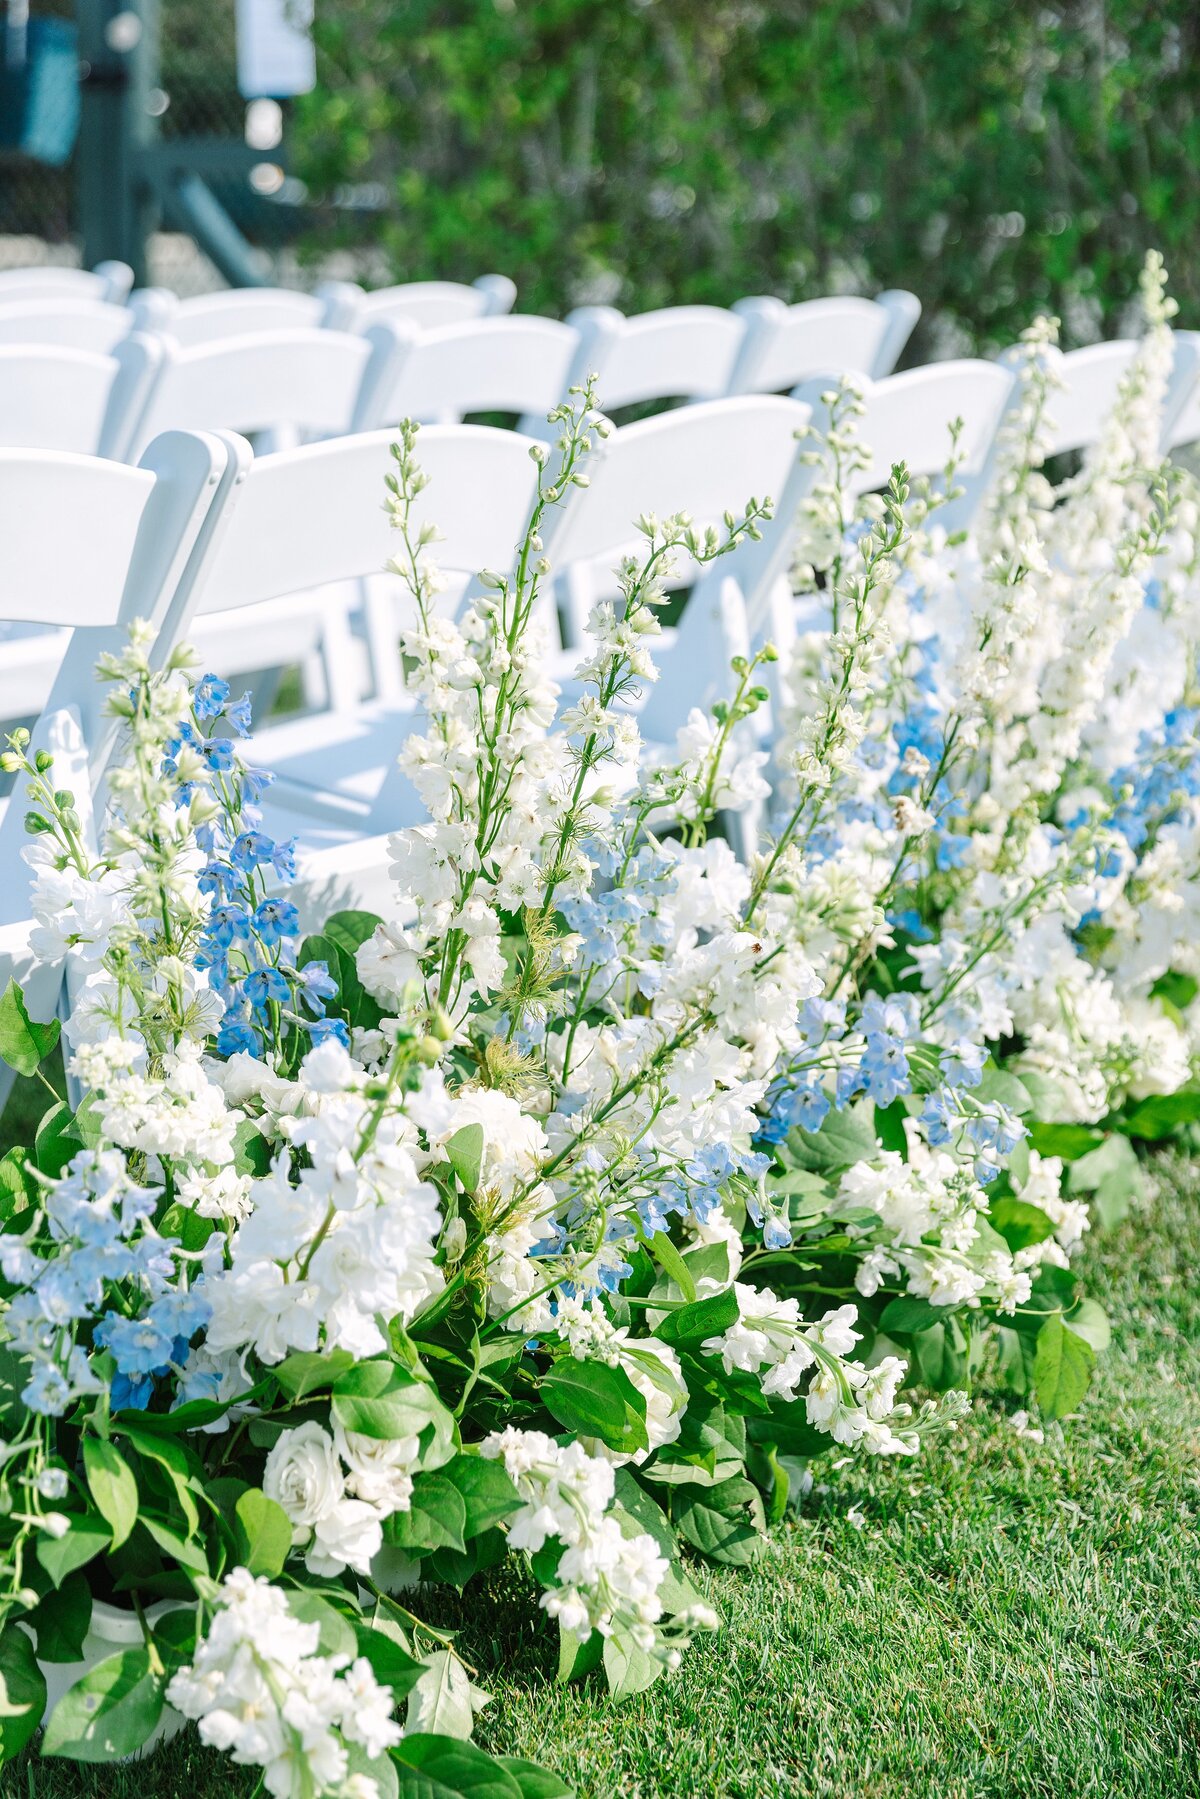 detail photo of blue and white floral arrangements at ceremony site